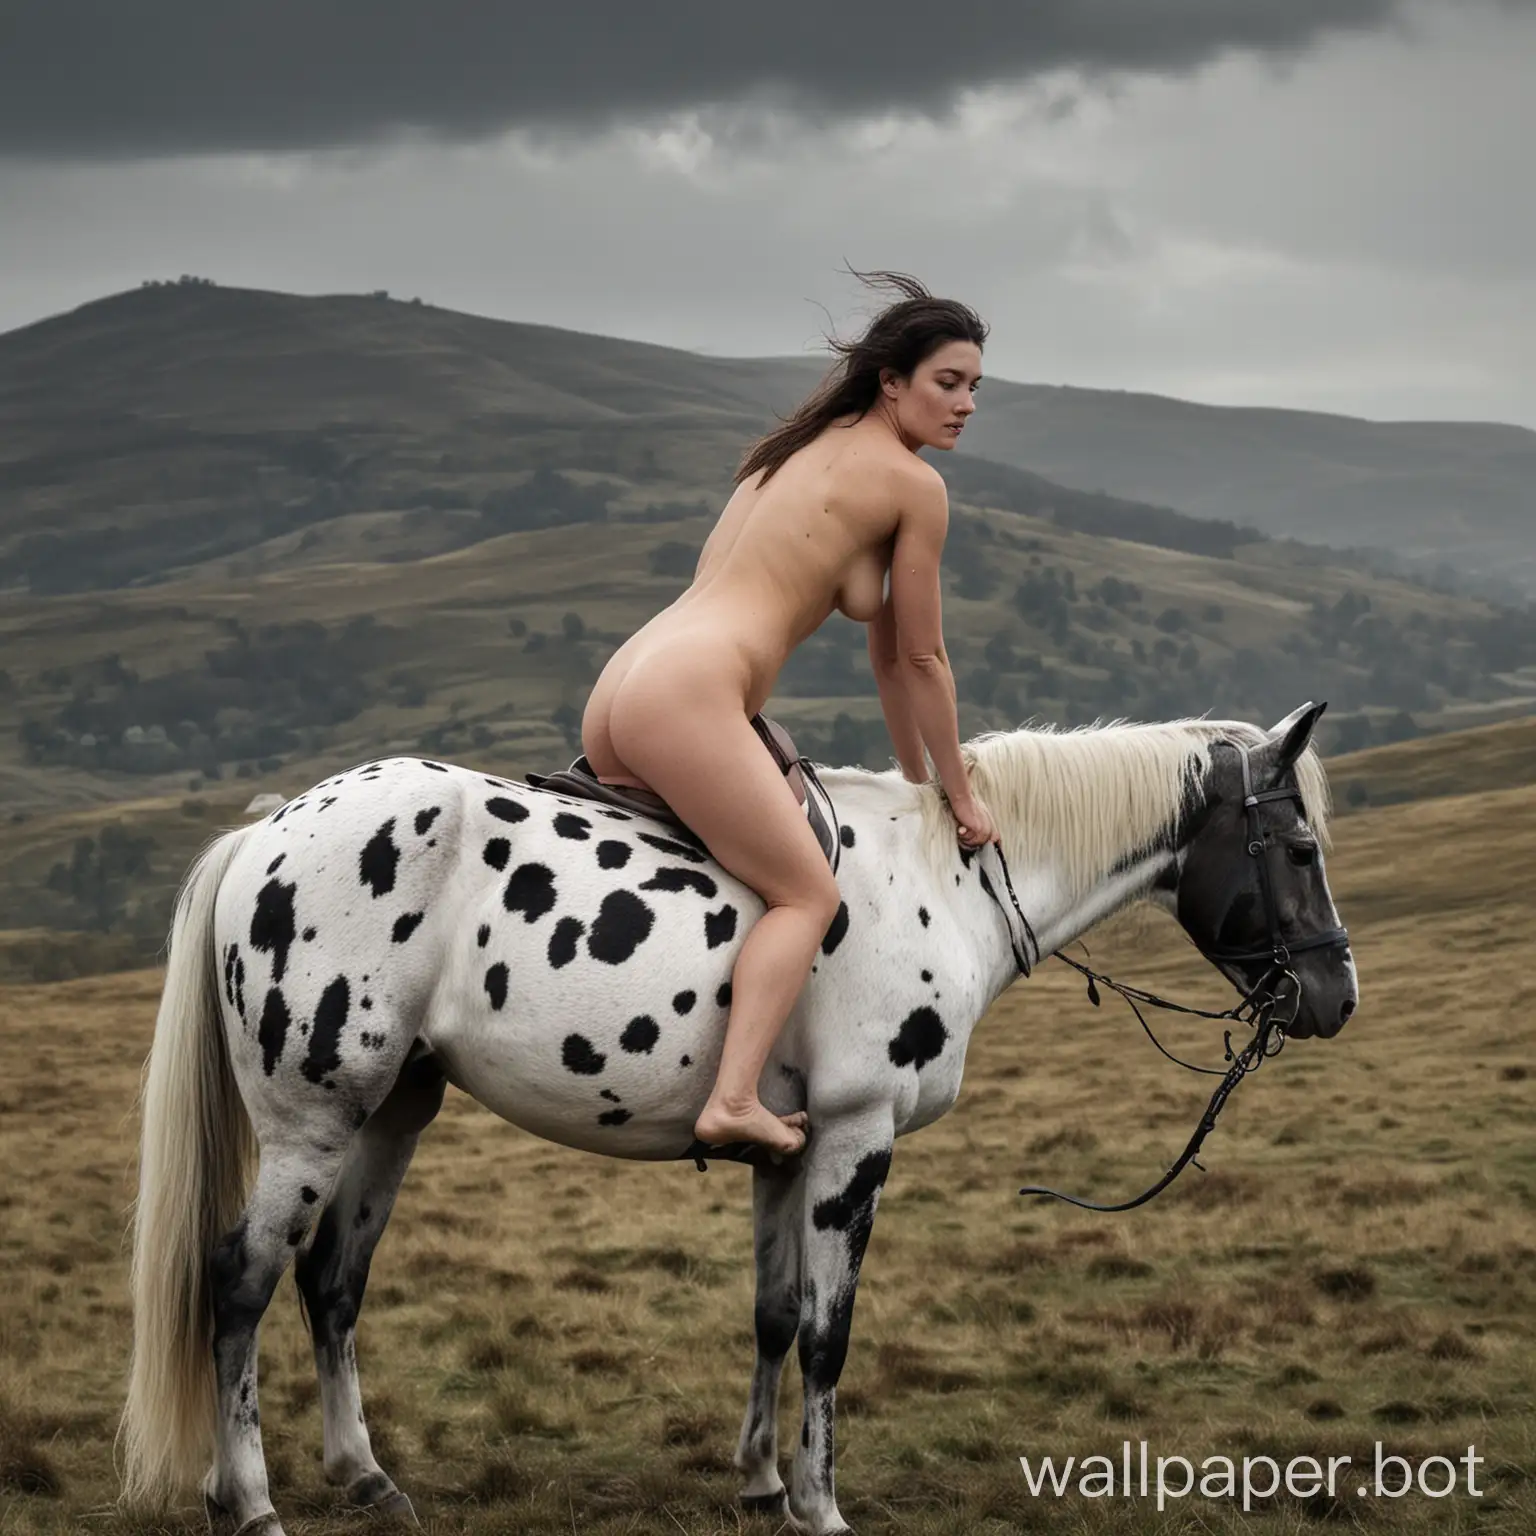 A horse with black and white spots with a naked woman on its back and low hills in the background with grey skies